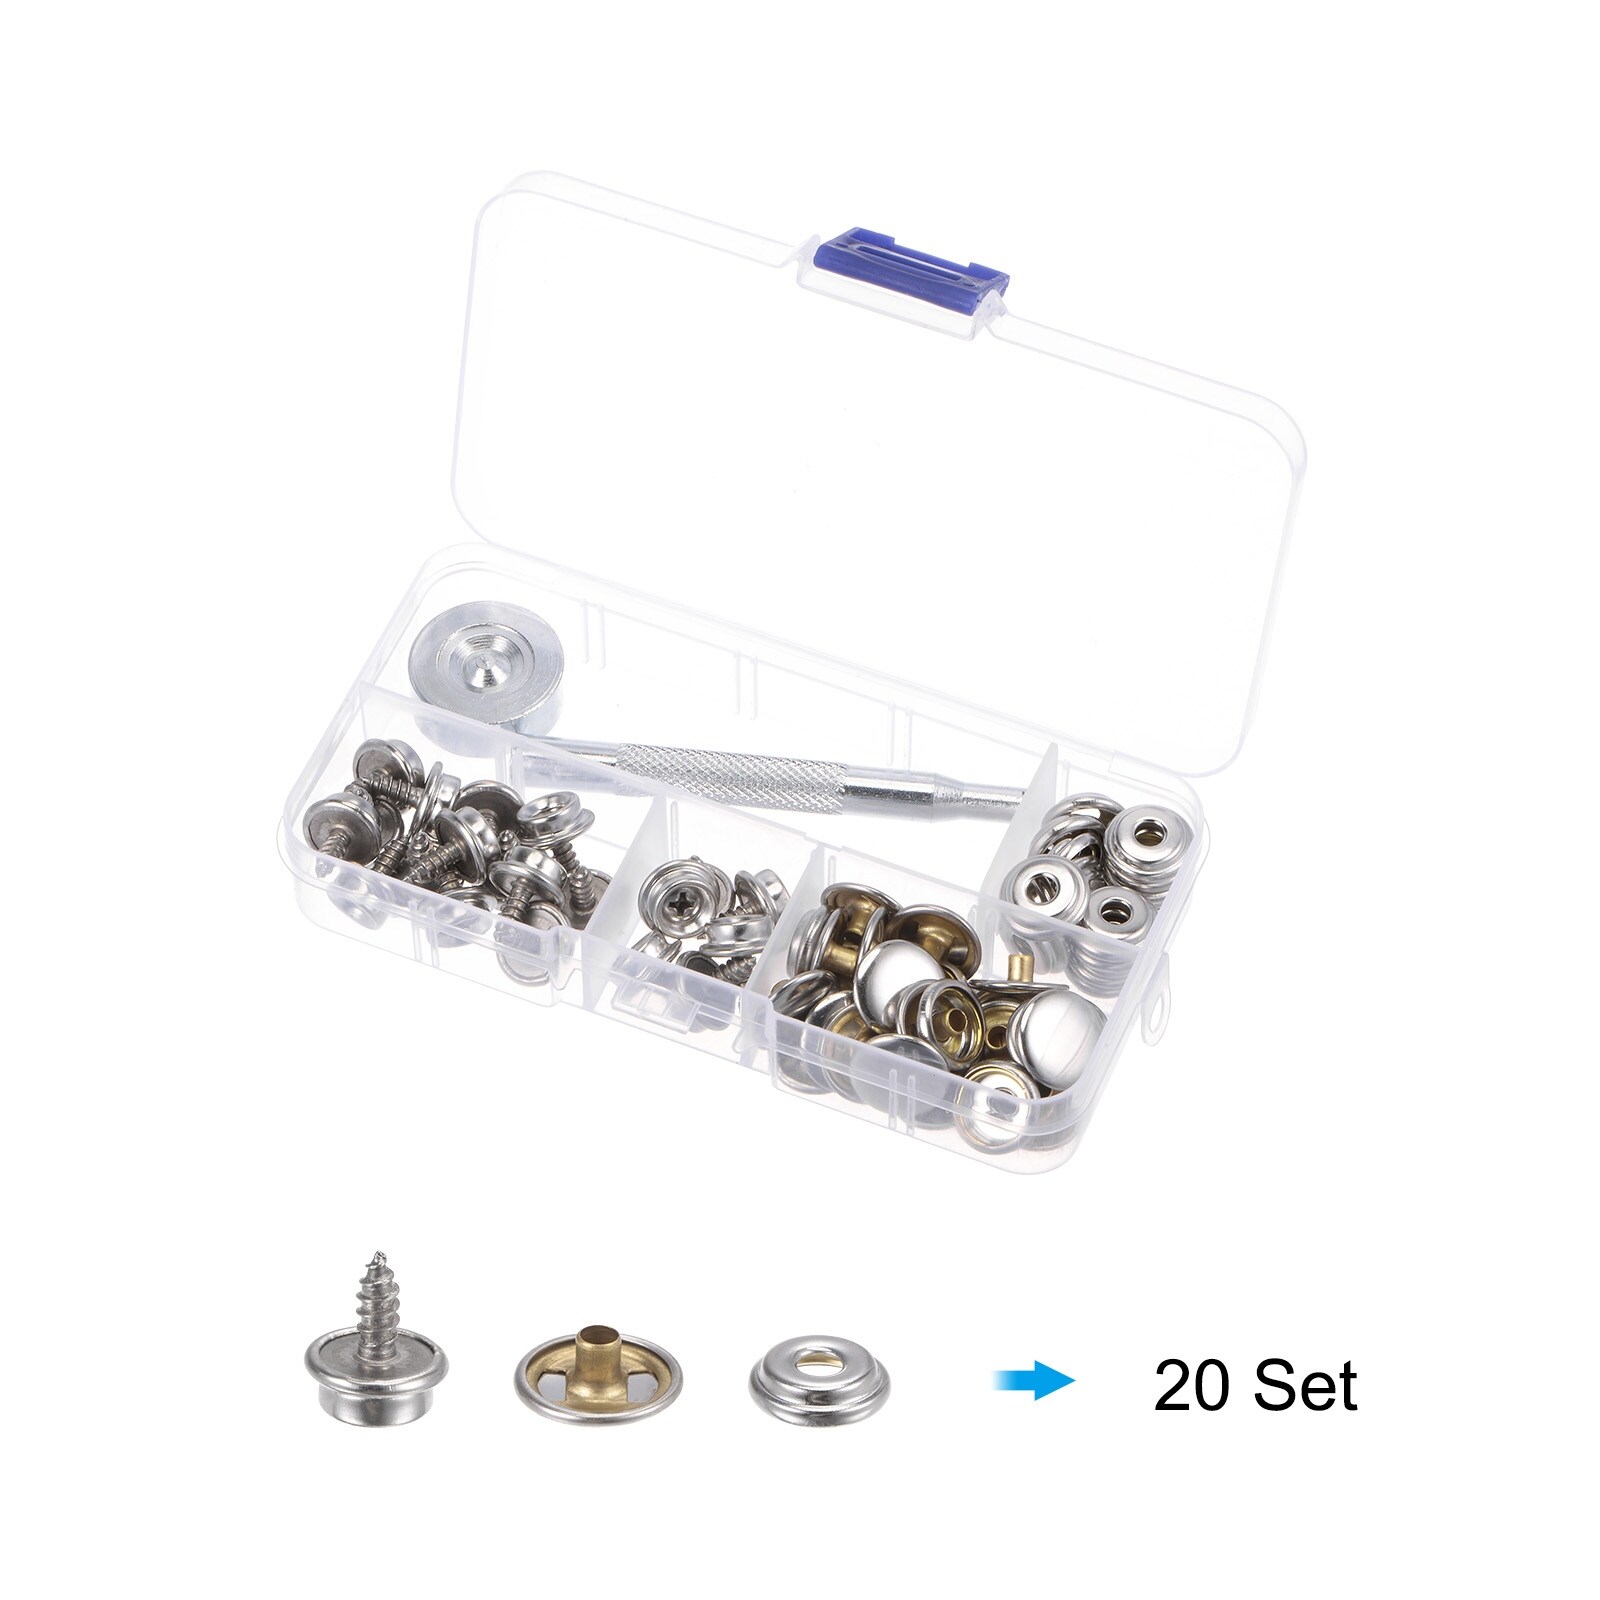 Unique Bargains 50 Sets Canvas Snap Kit 15mm Stainless Steel Snaps Button with Tool, Silver Tone - Silver Tone